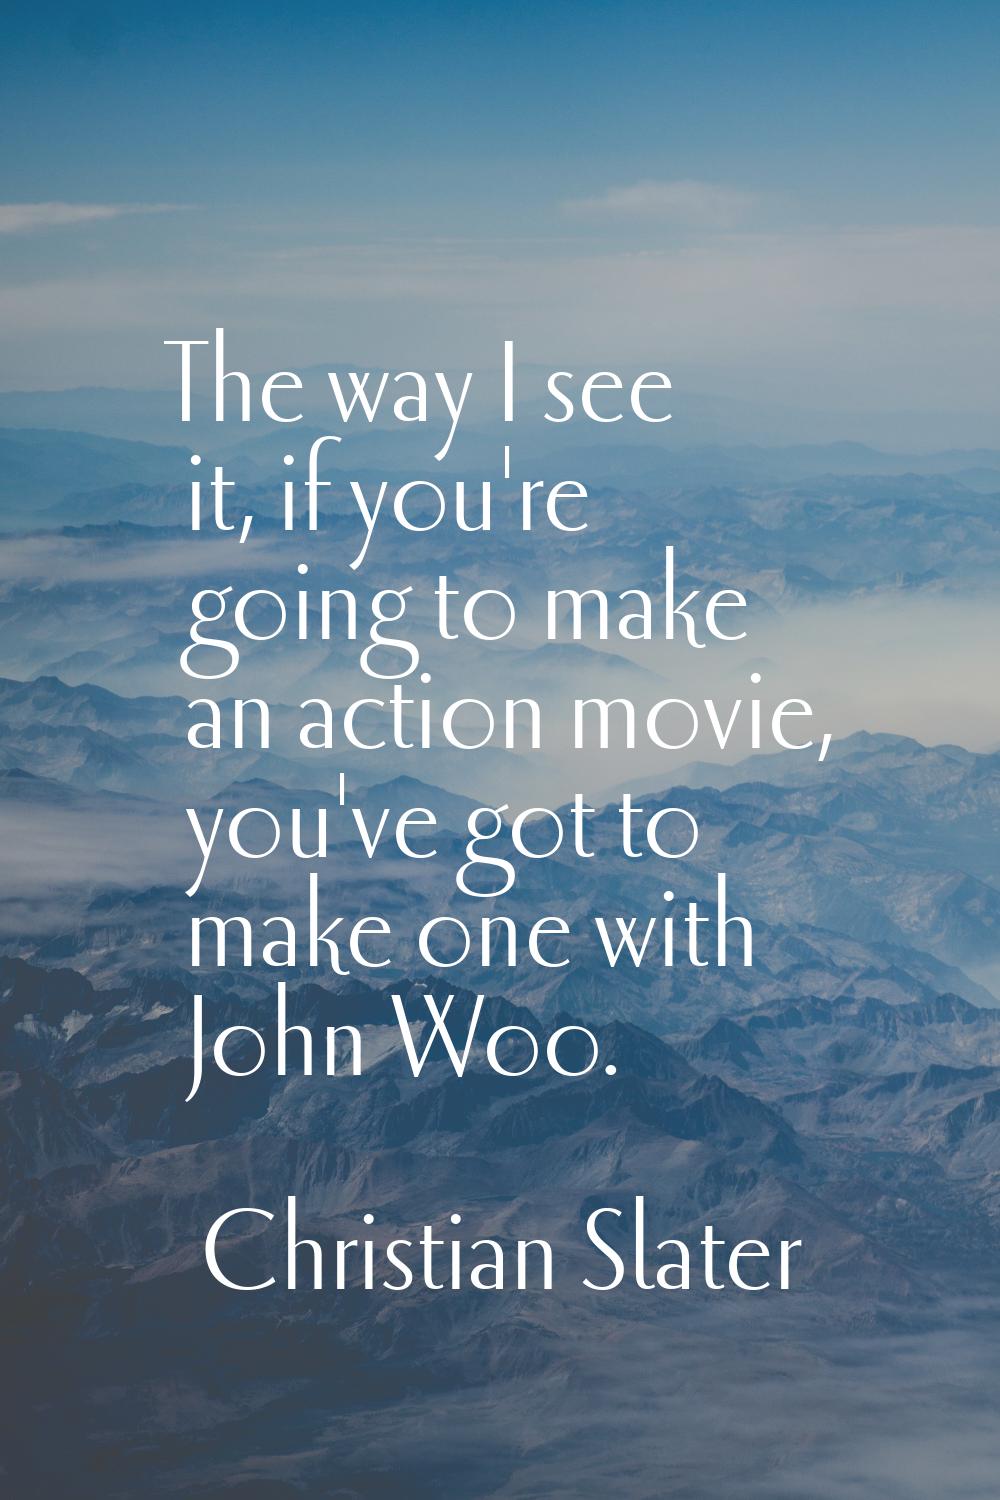 The way I see it, if you're going to make an action movie, you've got to make one with John Woo.